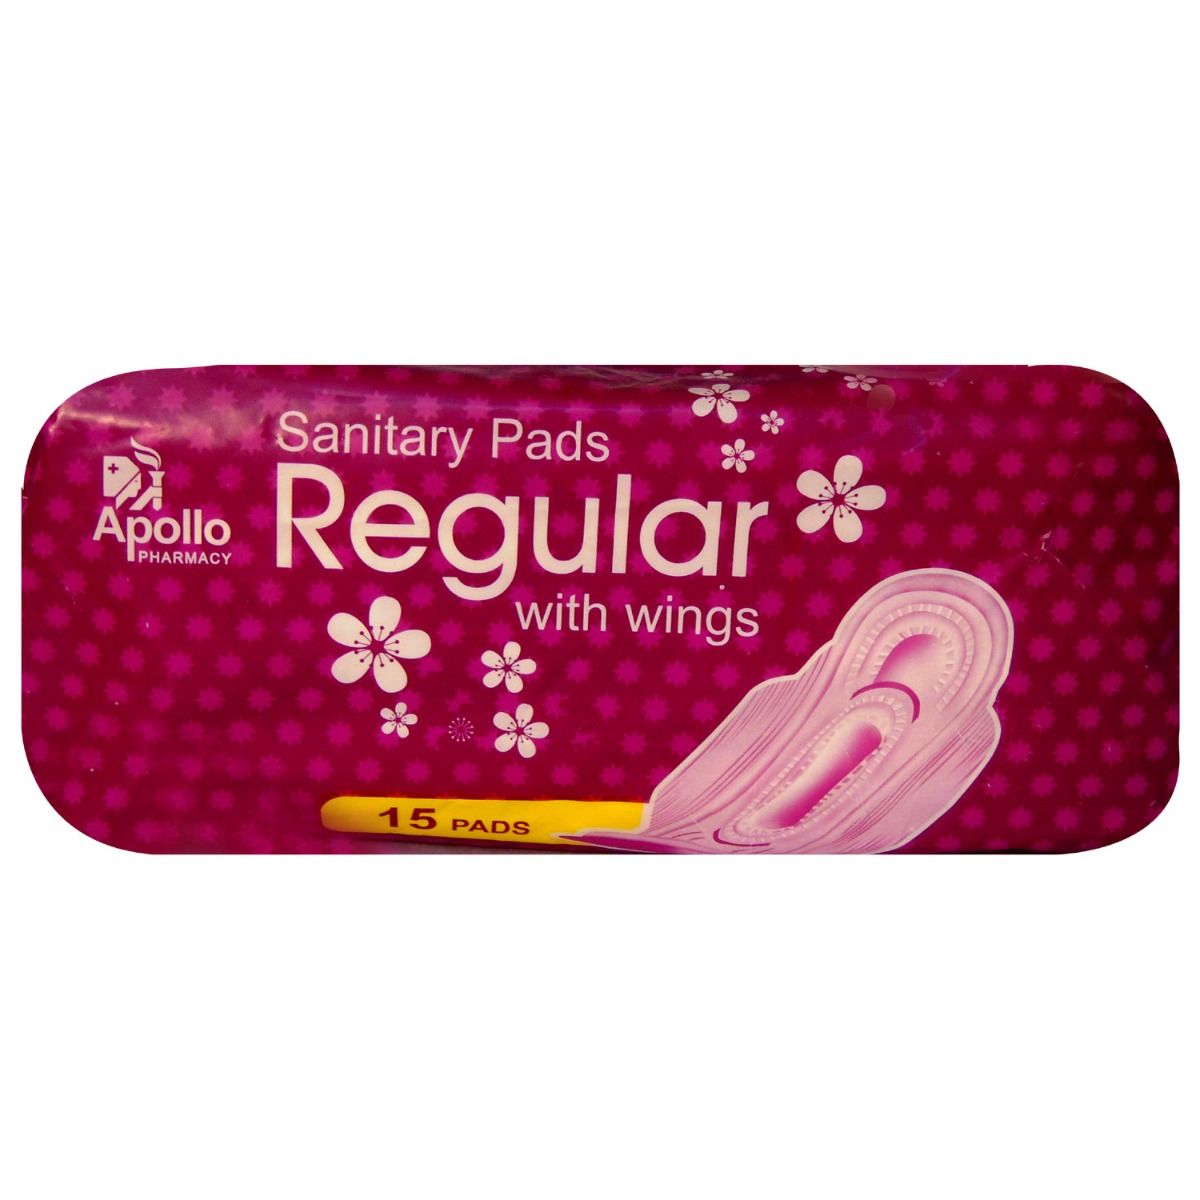 Buy Apollo Pharmacy Regular Sanitary Pads with Wings, 15 Count Online